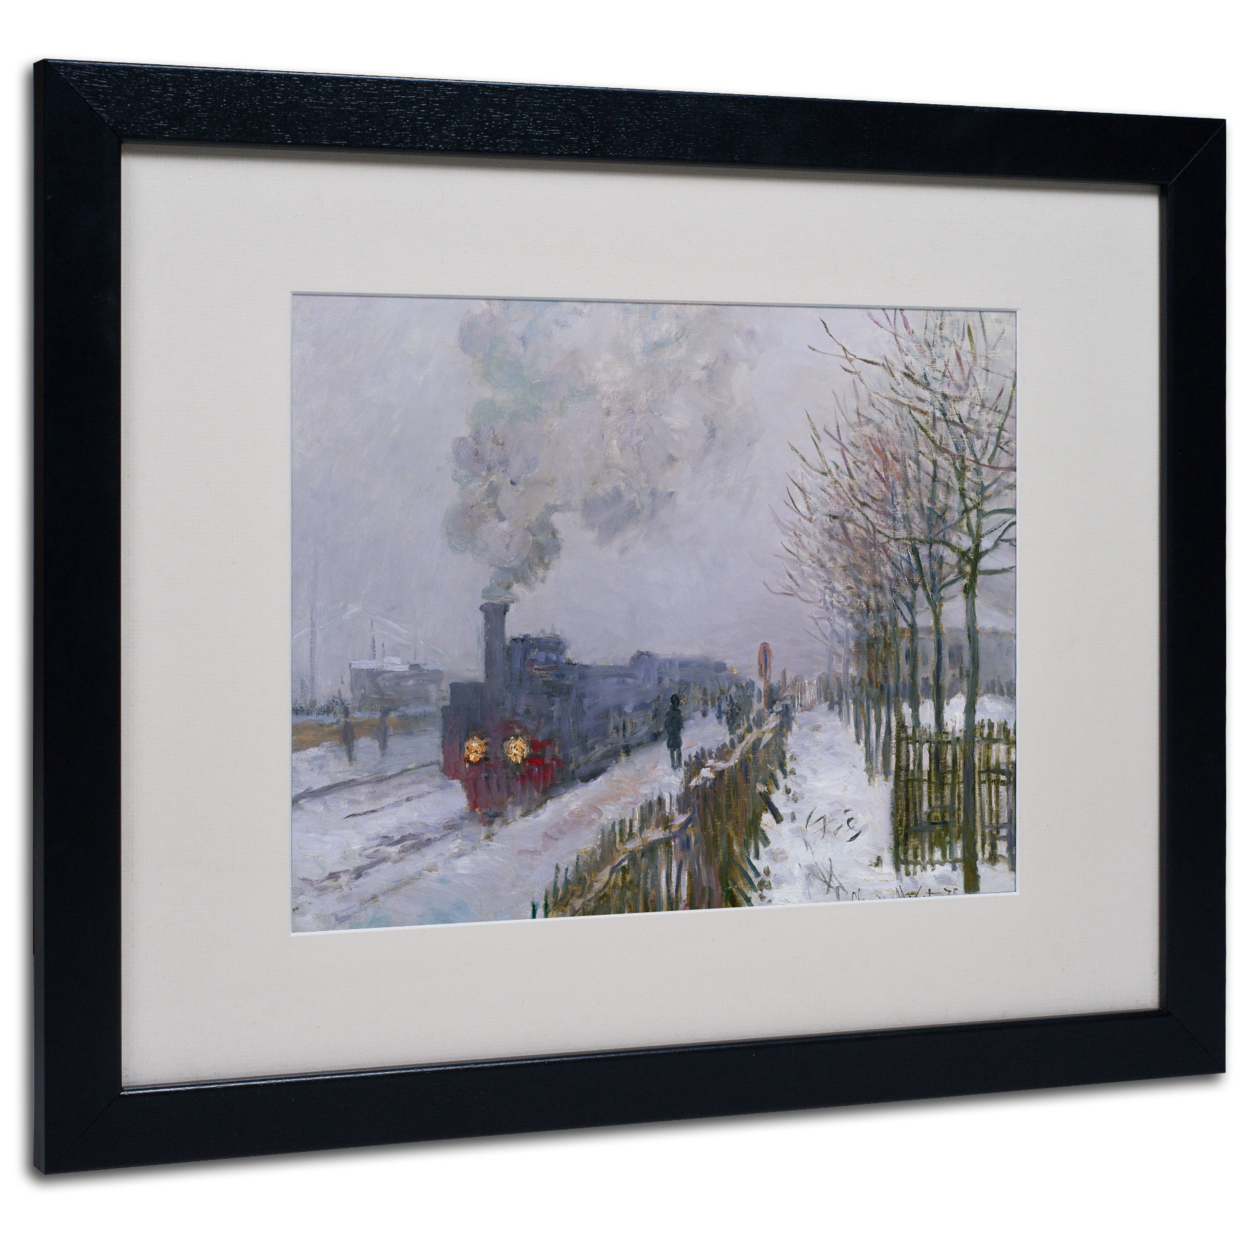 Claude Monet 'Train In The Snow' Black Wooden Framed Art 18 X 22 Inches